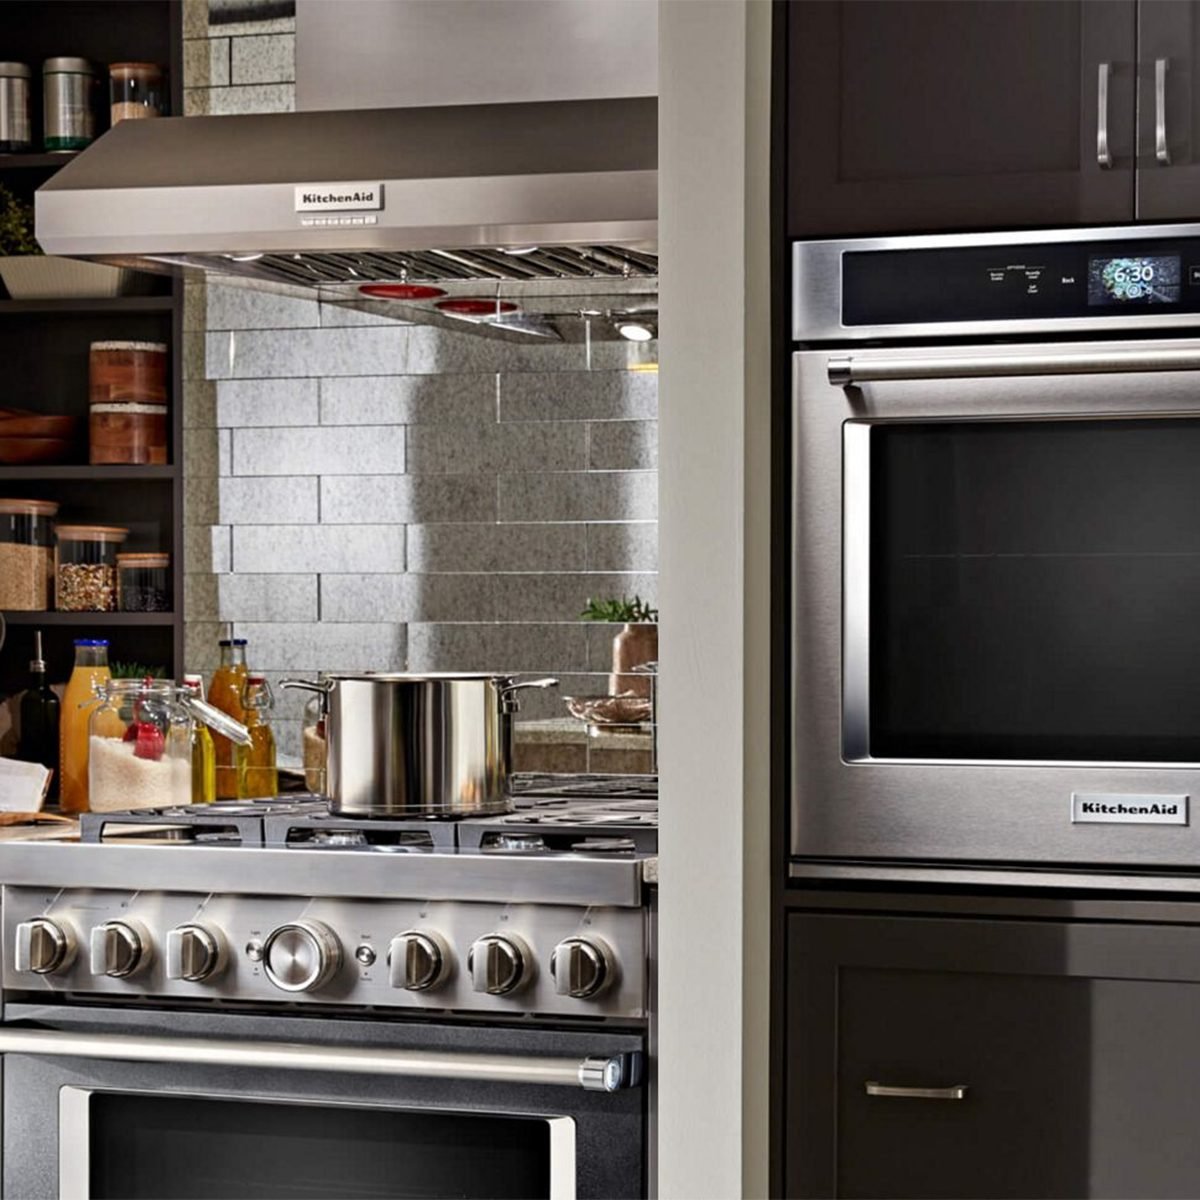 20 KitchenAid Major Appliances Our Editors and Shoppers Love